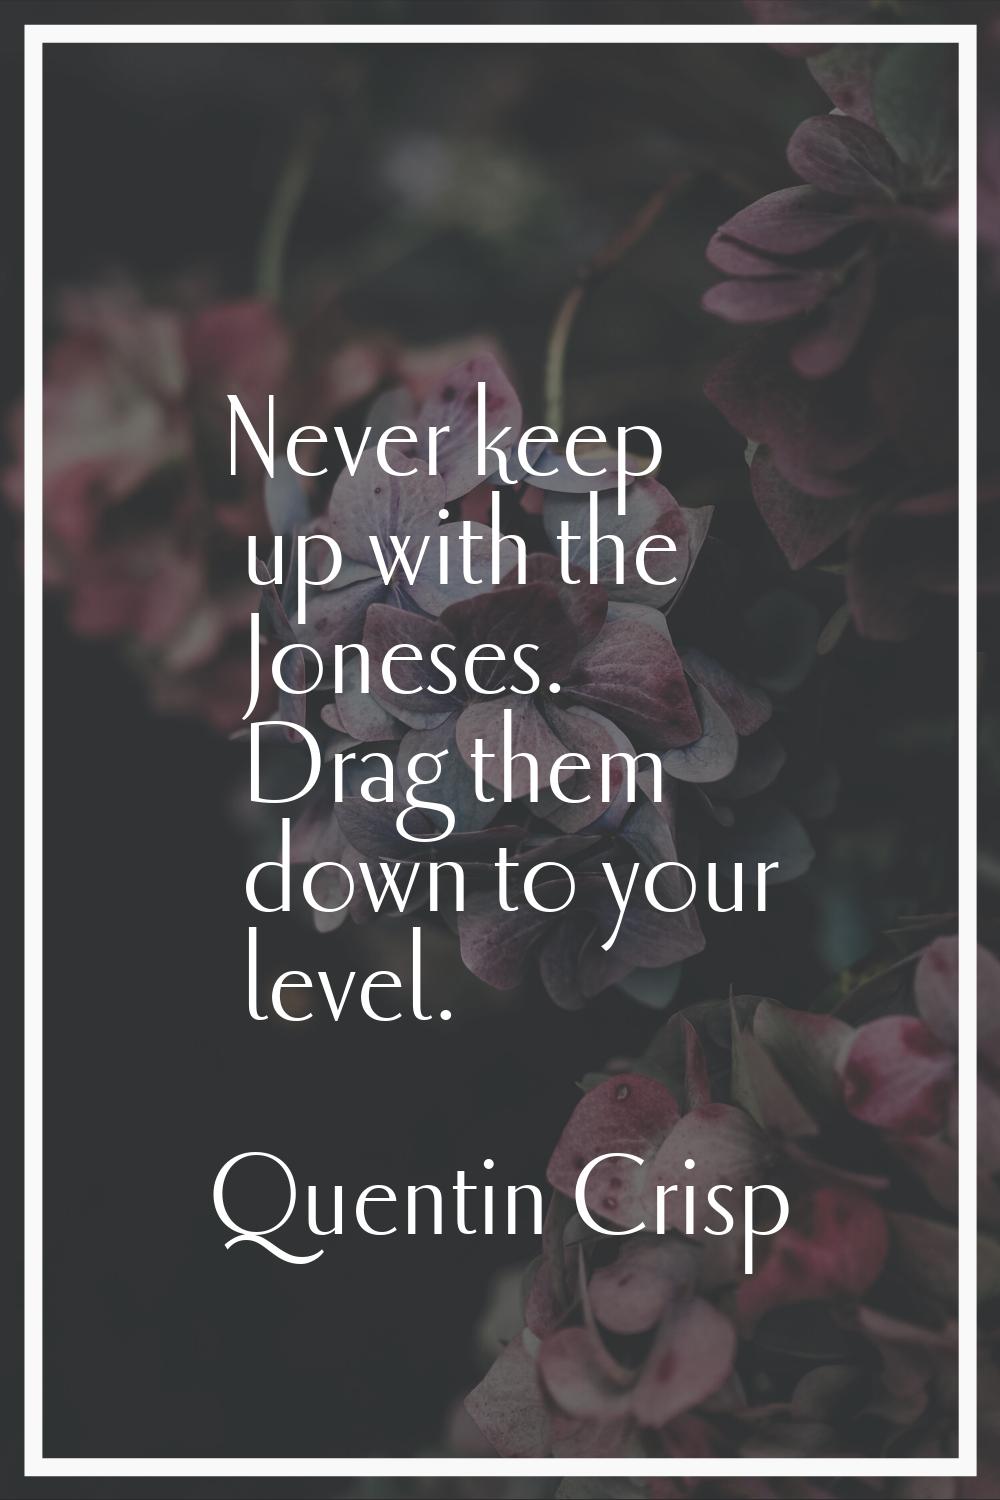 Never keep up with the Joneses. Drag them down to your level.